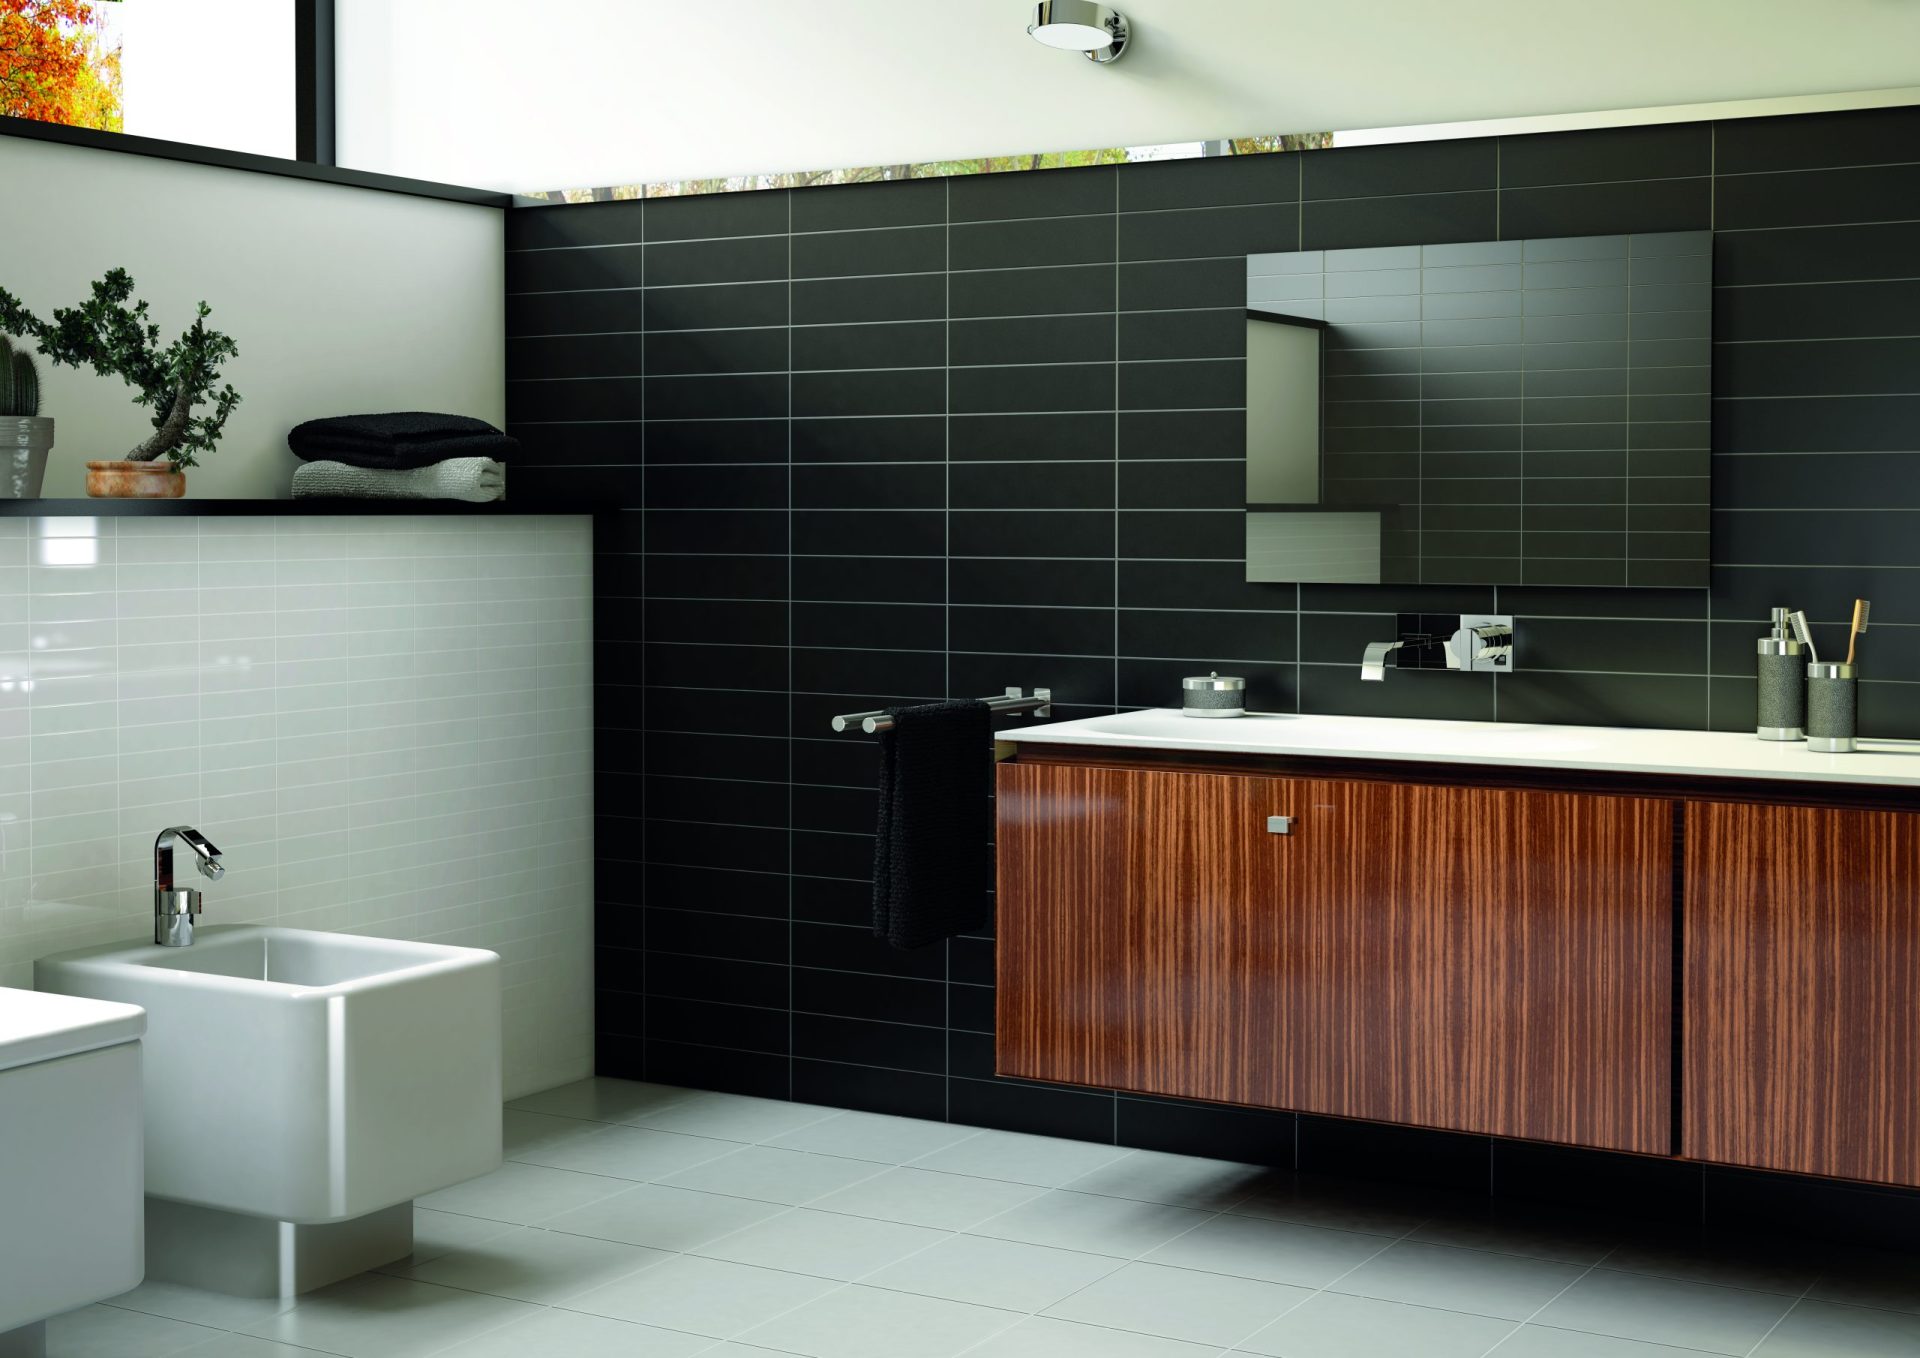 Metro Subway Blanco and Negro tiles instaled on separate walls in modern bathroom